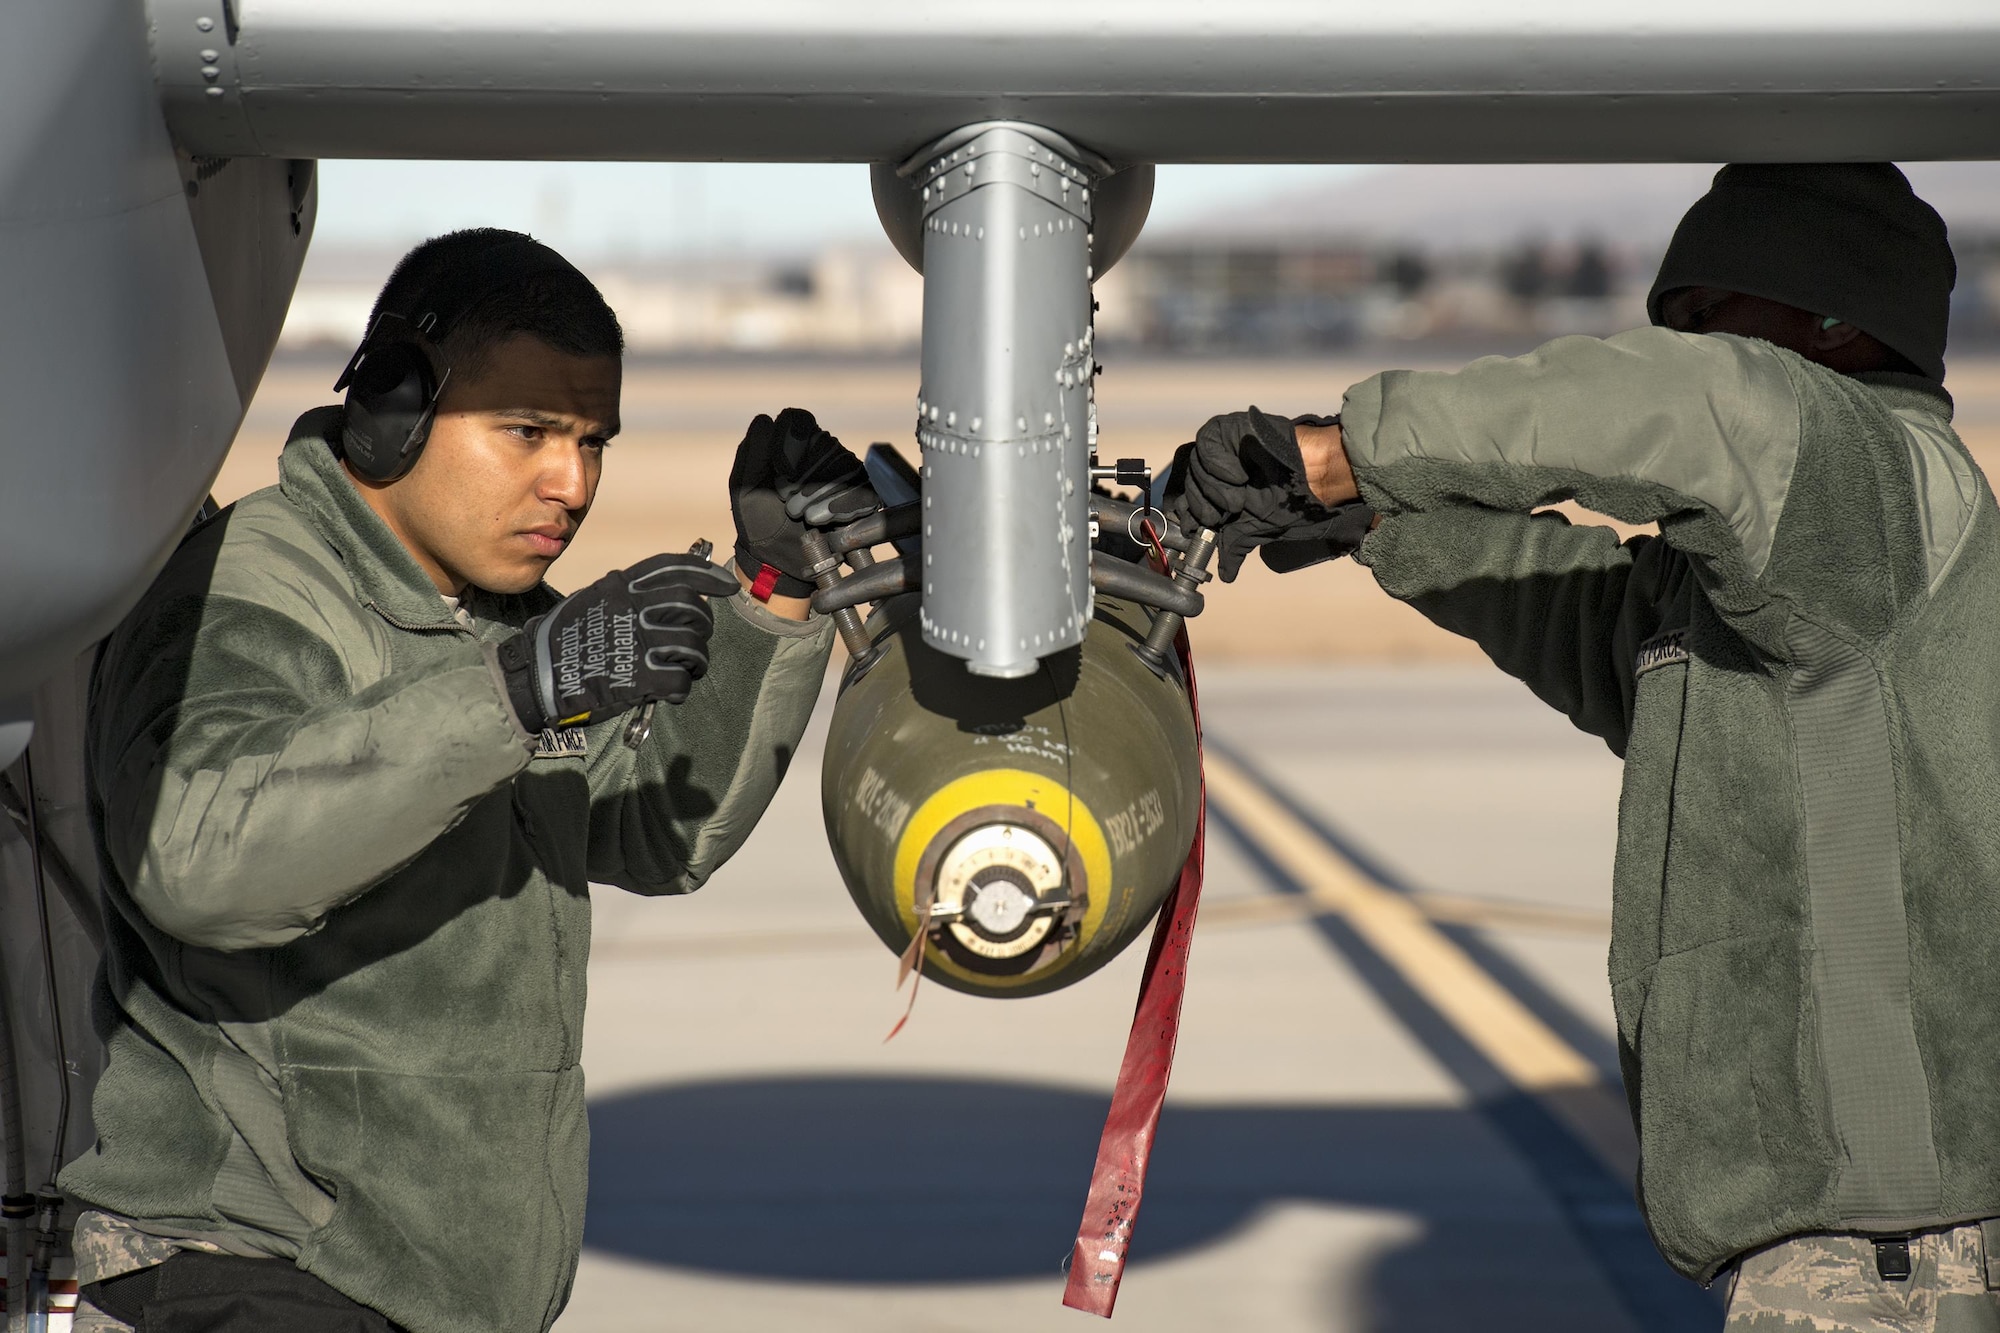 Airman First Class Carlos Quintanilla, left, and Staff Sgt. Tayrell Washington, 74th Aircraft Maintenance Unit weapons load team members, secure a Mark 82 general purpose bomb to the bottom of an A-10C Thunderbolt II during Green Flag-West 17-03, Jan. 24, 2017, at Nellis Air Force Base, Nev. Weapons Airmen enabled joint force training during the two-week exercise by loading weapons, inspecting jets and maintaining munitions systems. Some of the live munitions included the Mark 82 and 84 general purpose bombs, high-explosive incendiary 30mm rounds and the 500 pound GBU-12 Paveway II laser-guided bomb. (U.S. Air Force photo by Staff Sgt. Ryan Callaghan)